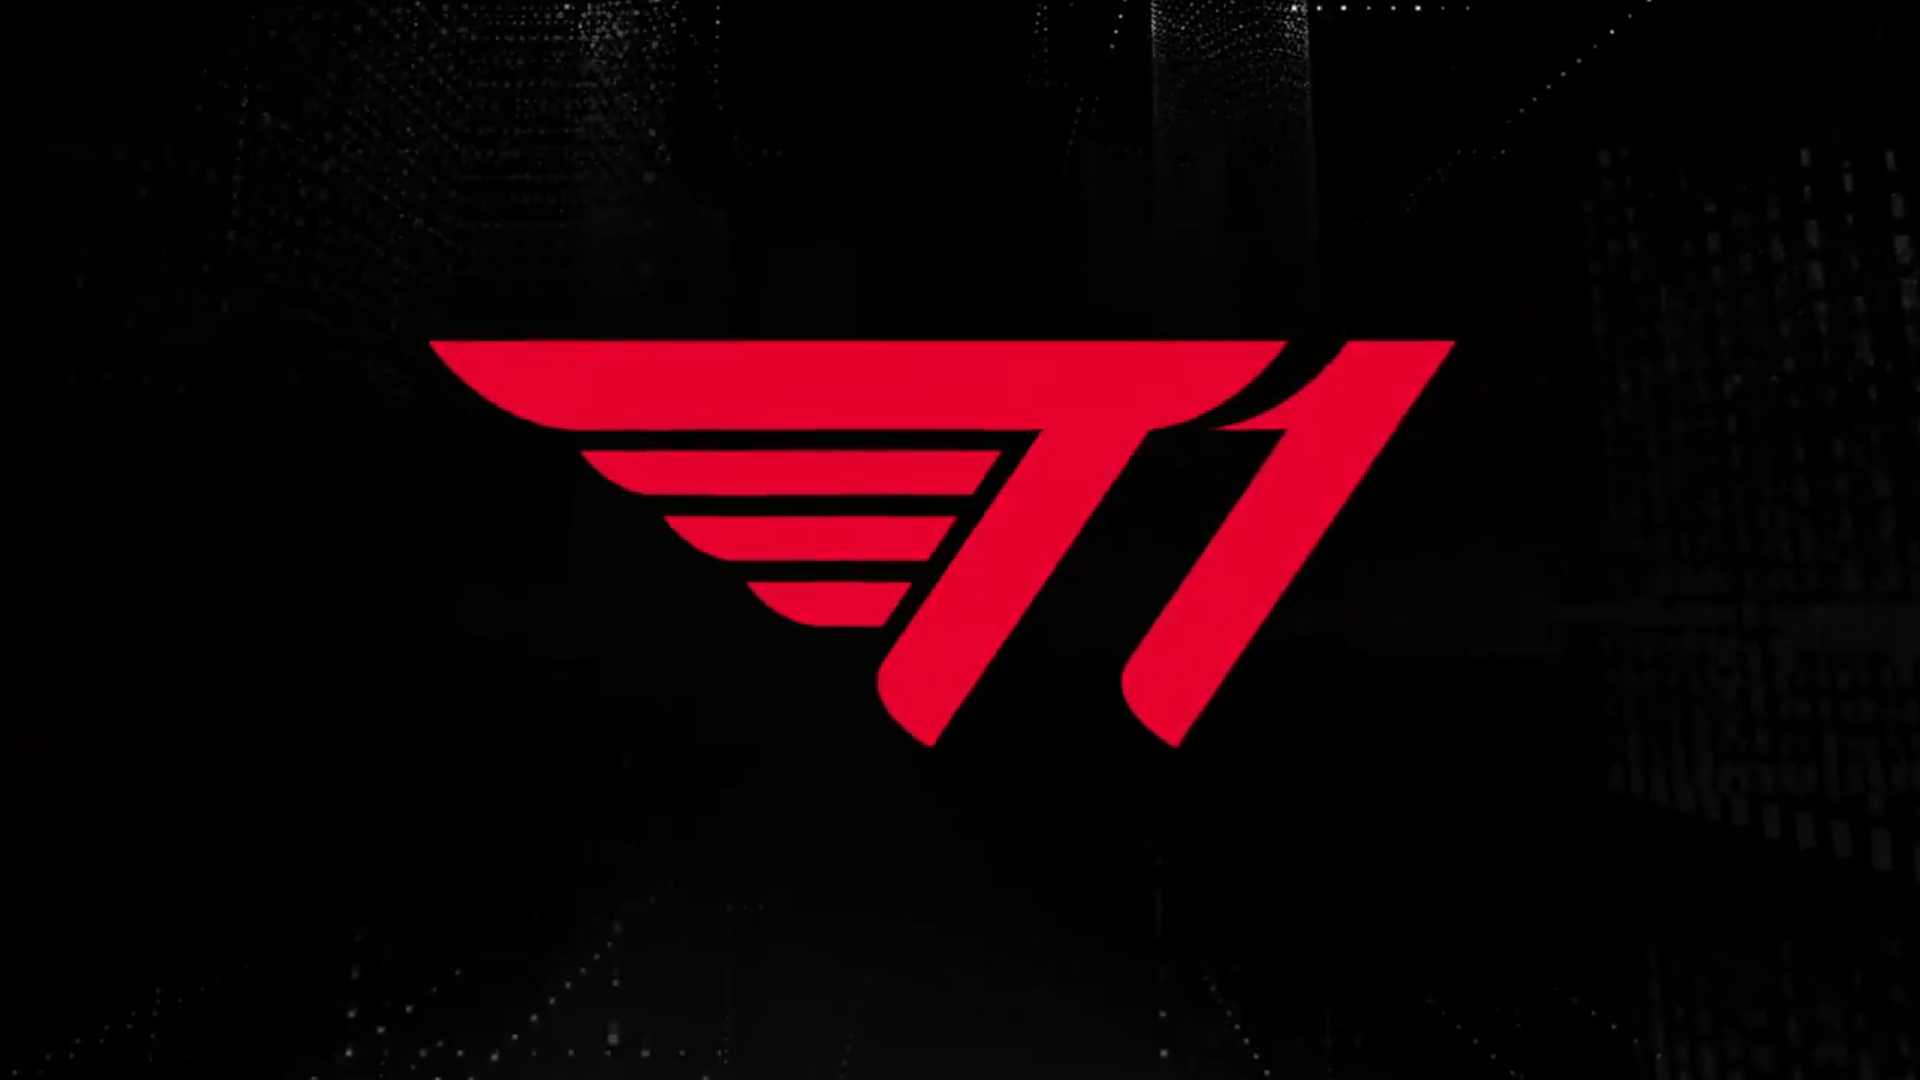 SKT changes its logo ahead of Worlds 2019 Group Stage. Dot